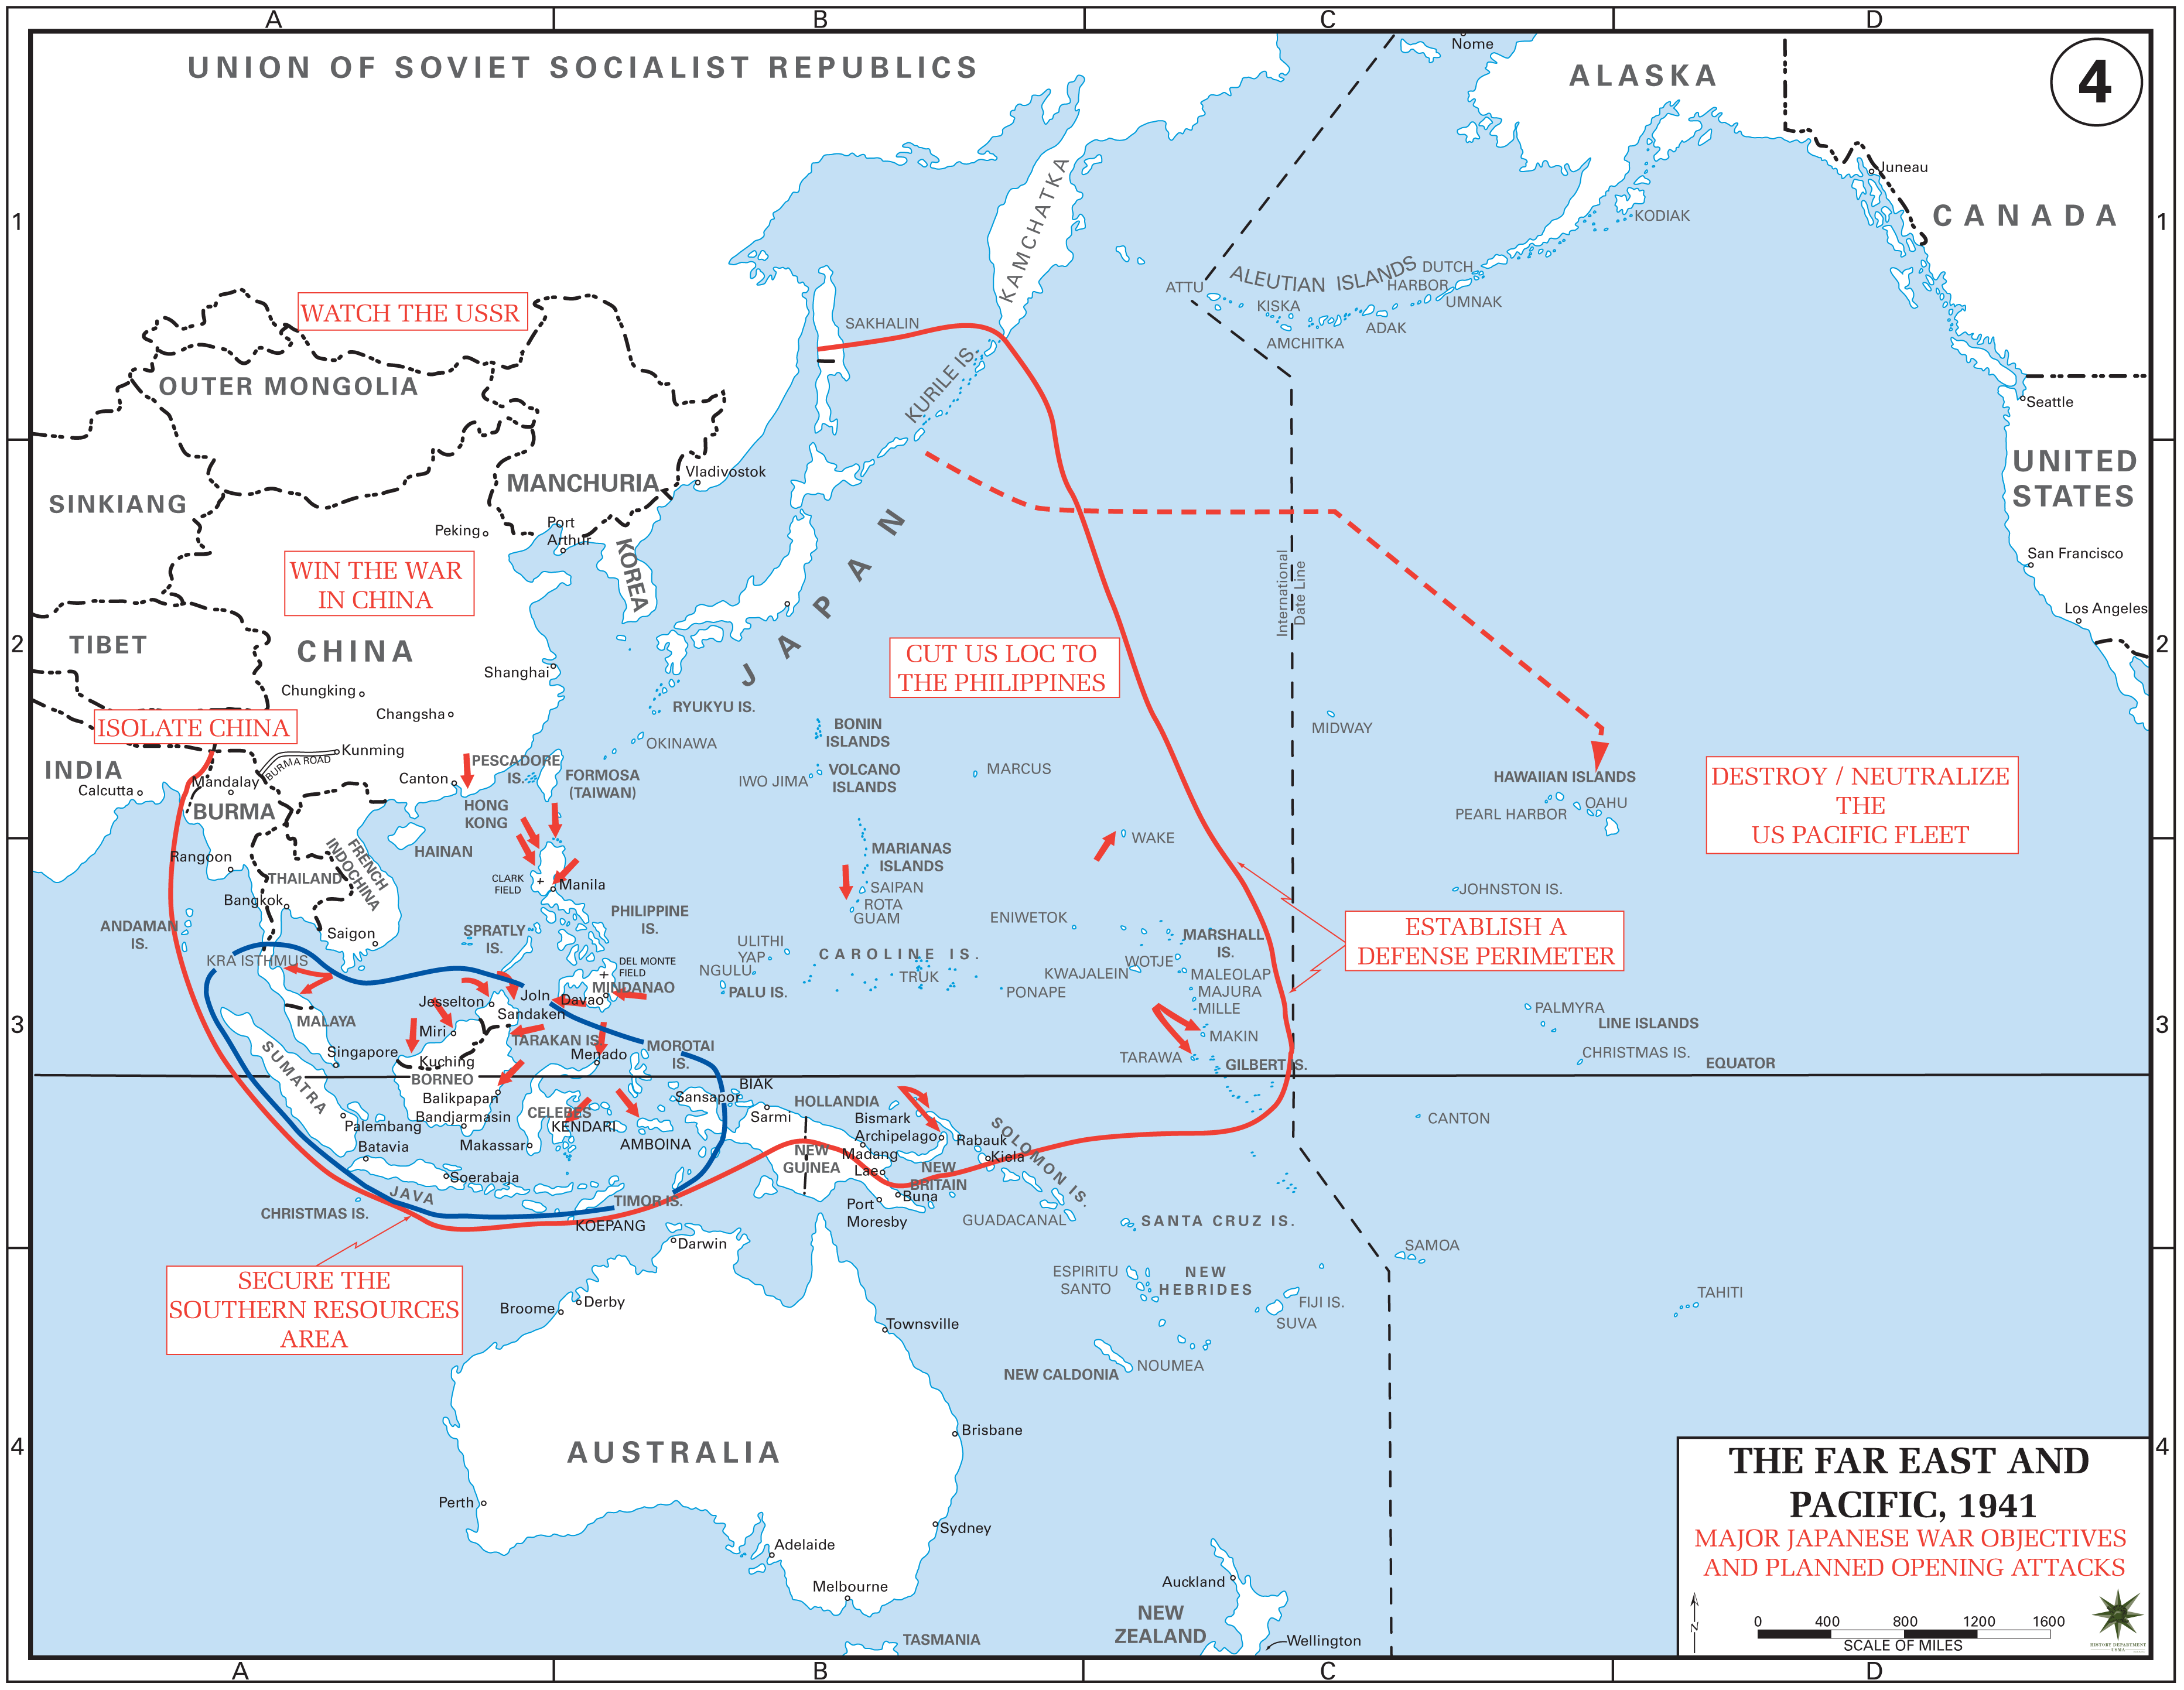 Japanese war objectives and planned opening attacks in World War II.